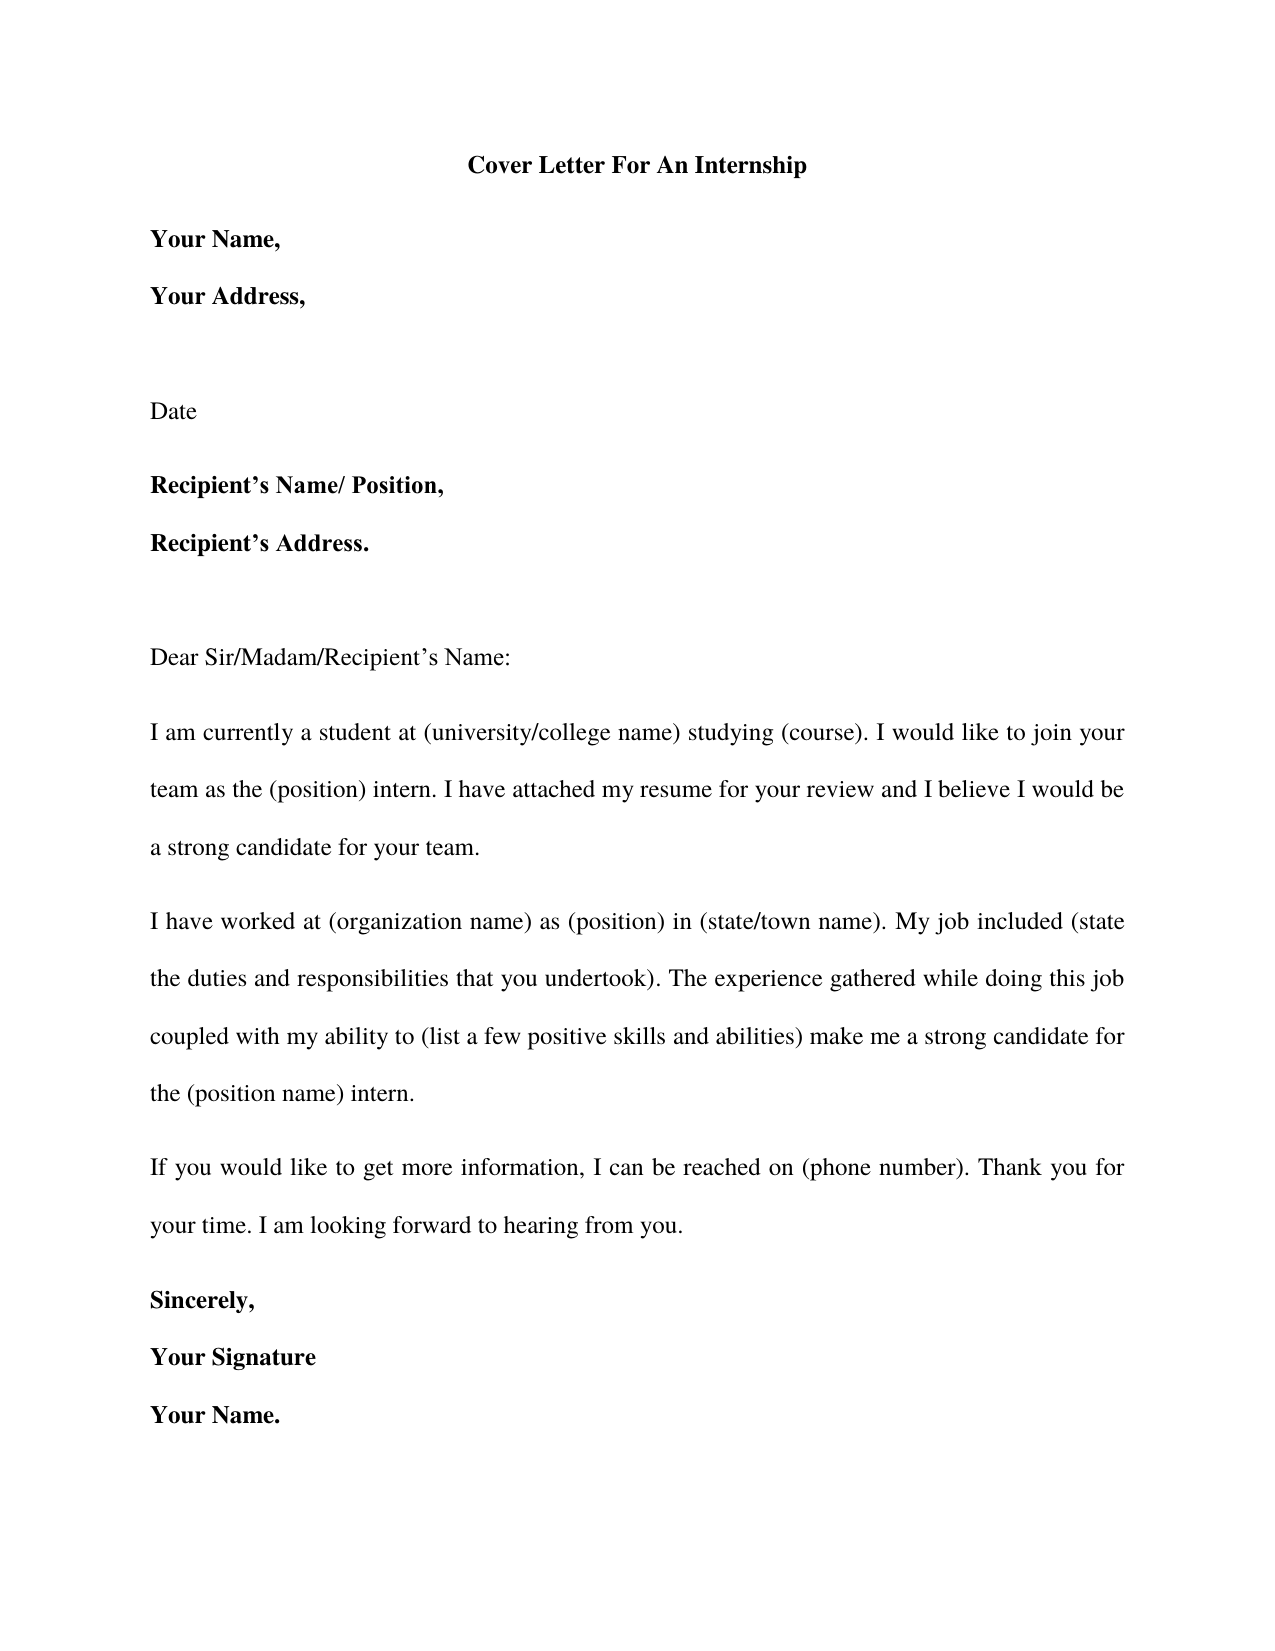 cover letter examples for internship application